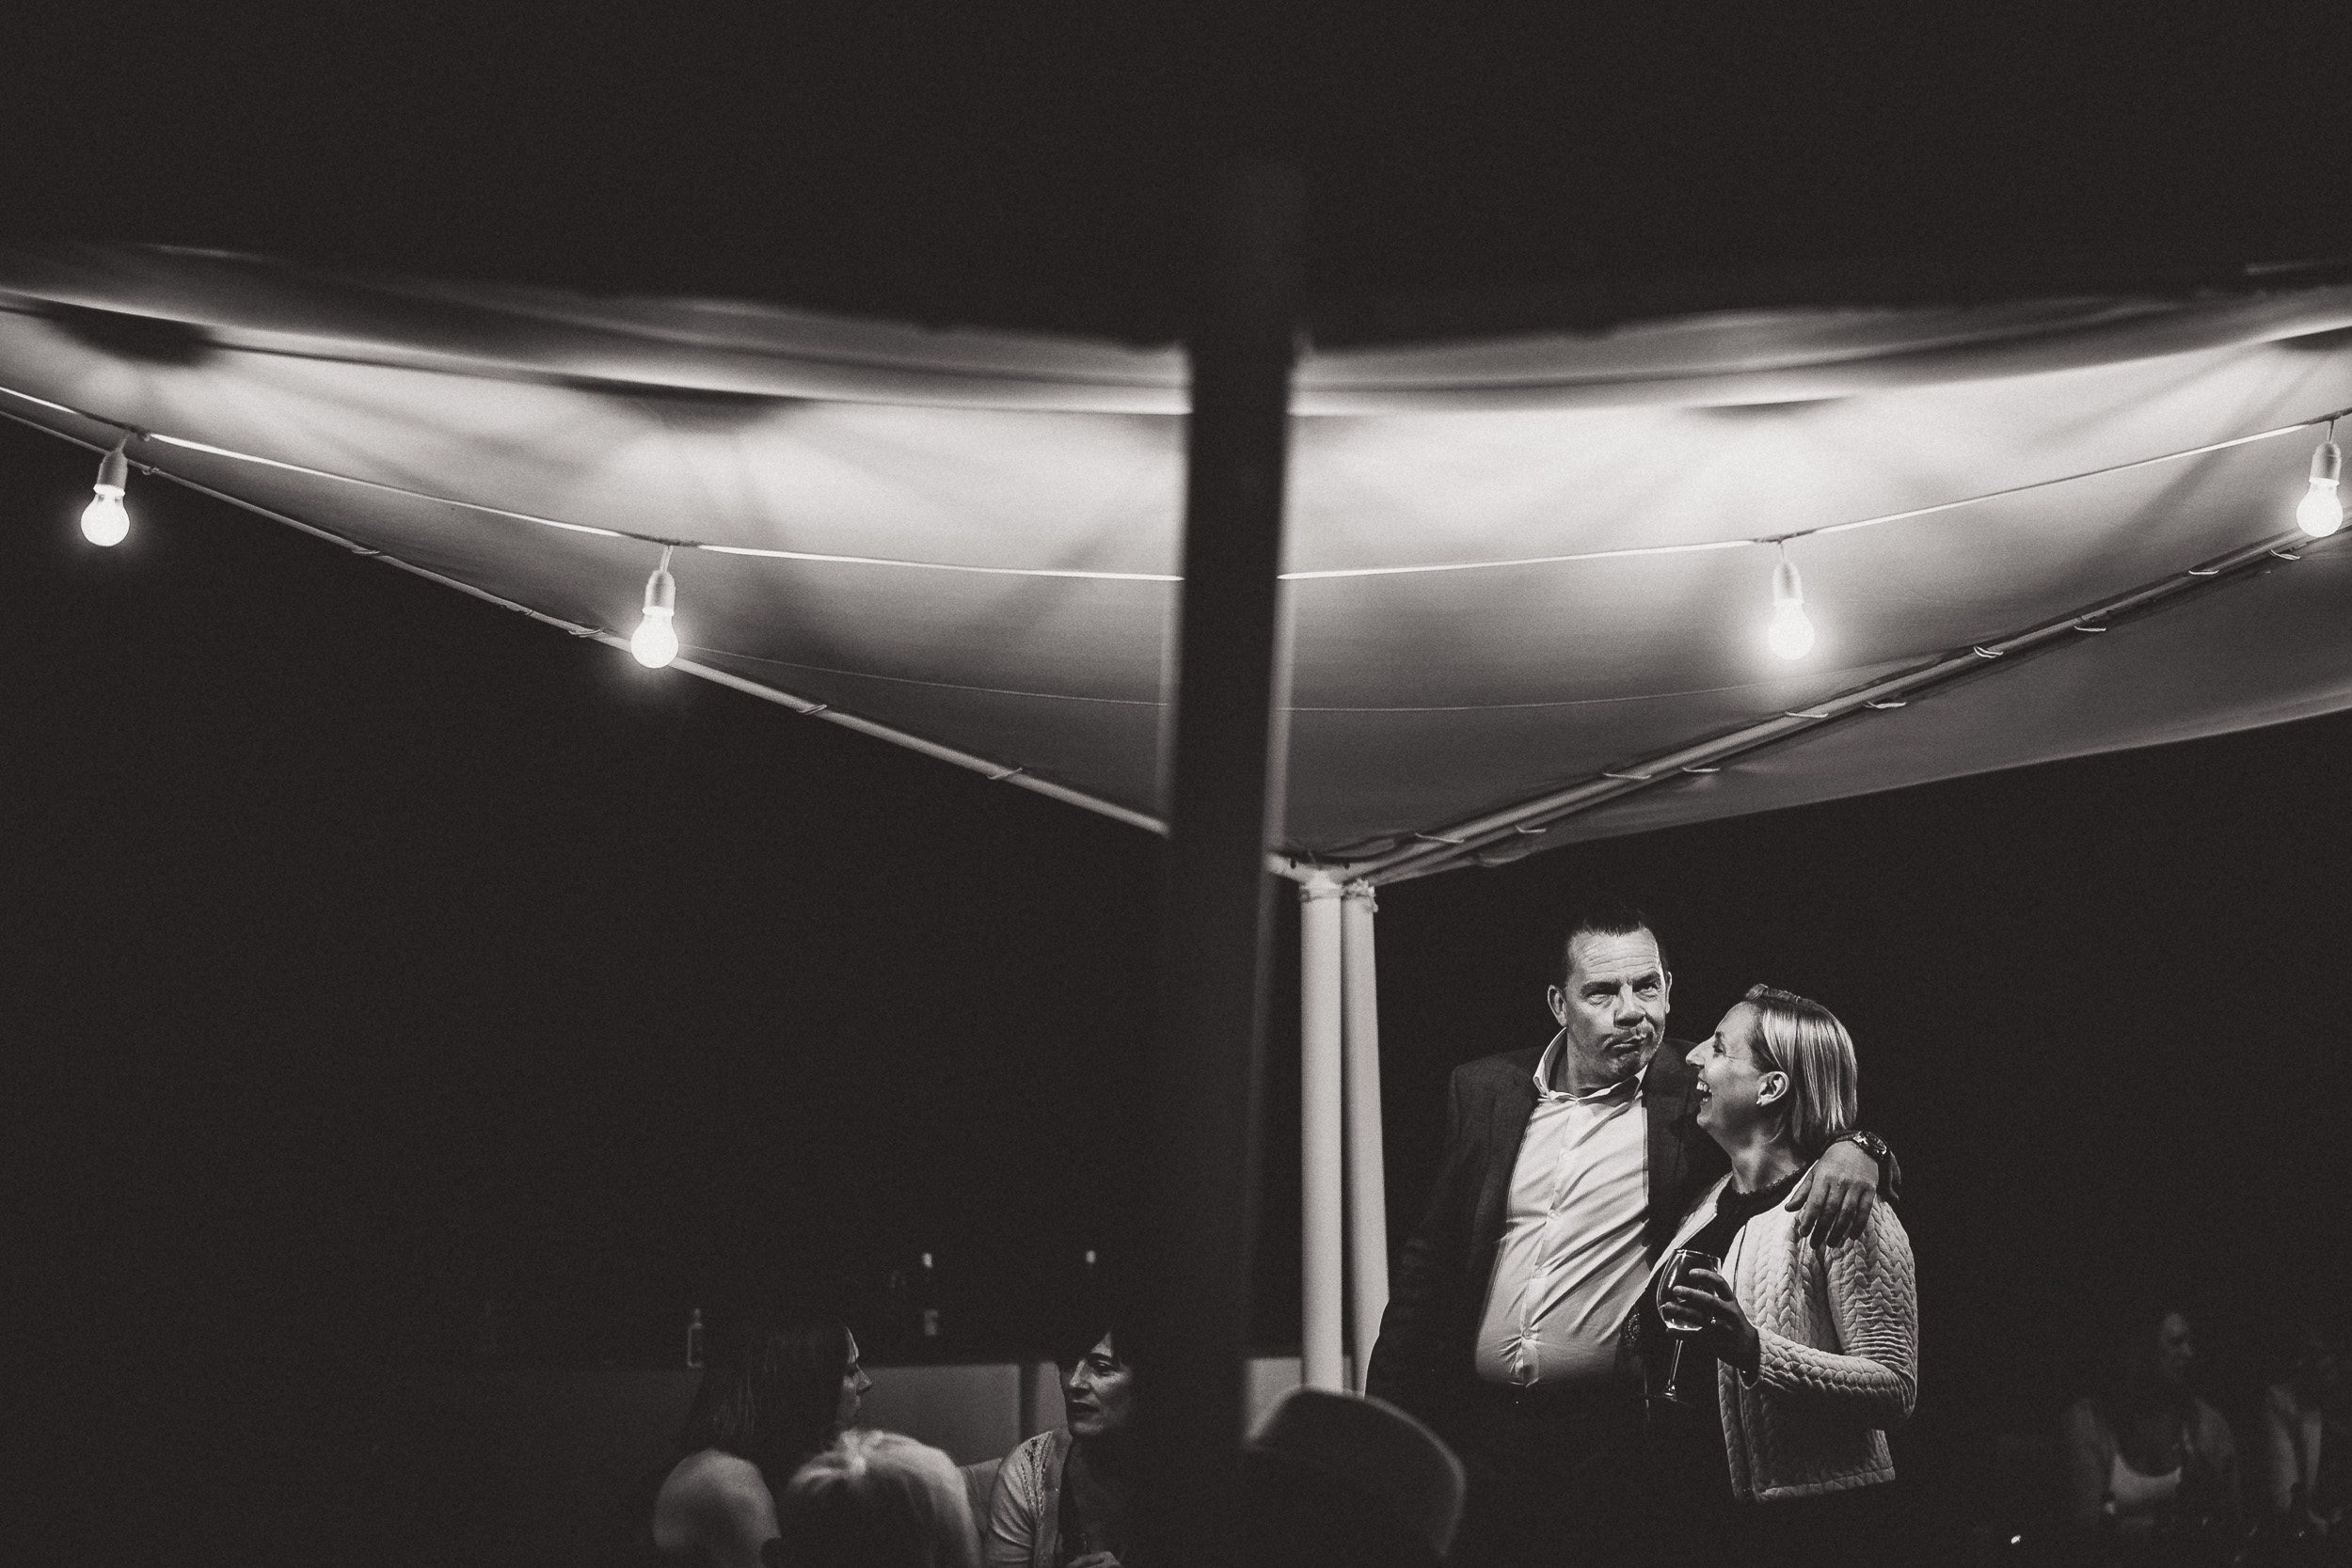 A groom and bride standing under a tent at night.